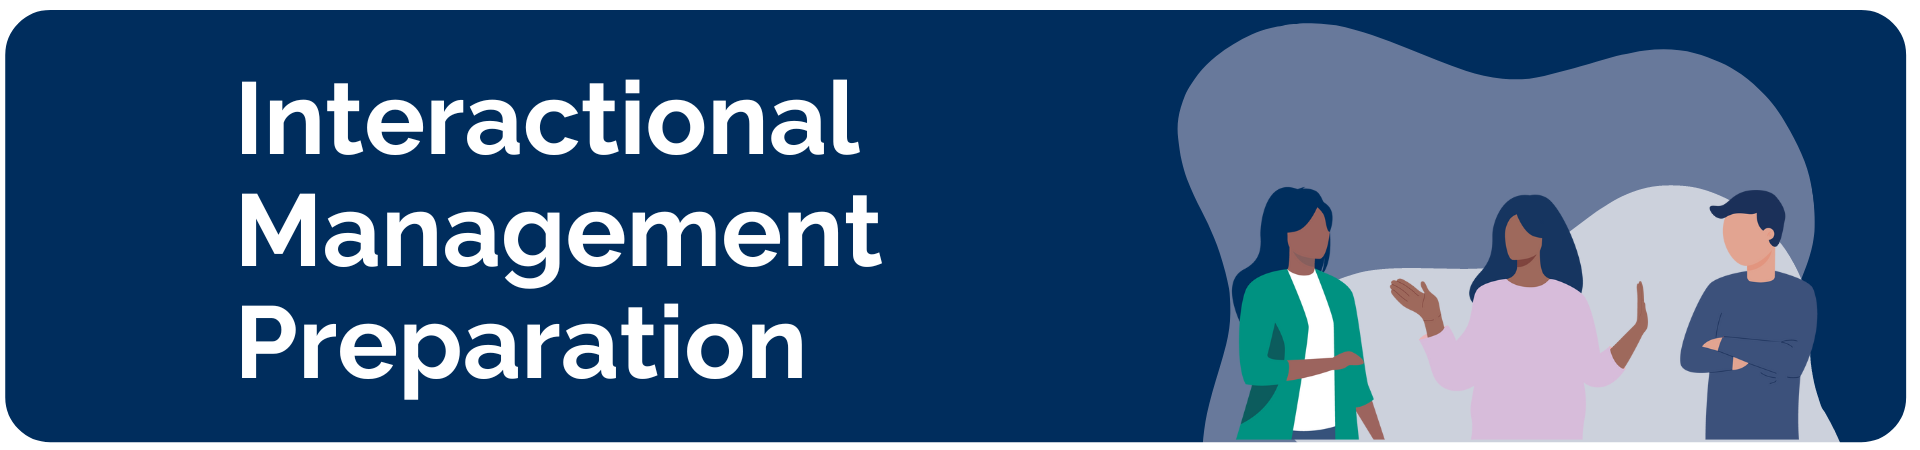 A banner stating 'Interactional Management Preparation' with a graphic illustrating interactional management.